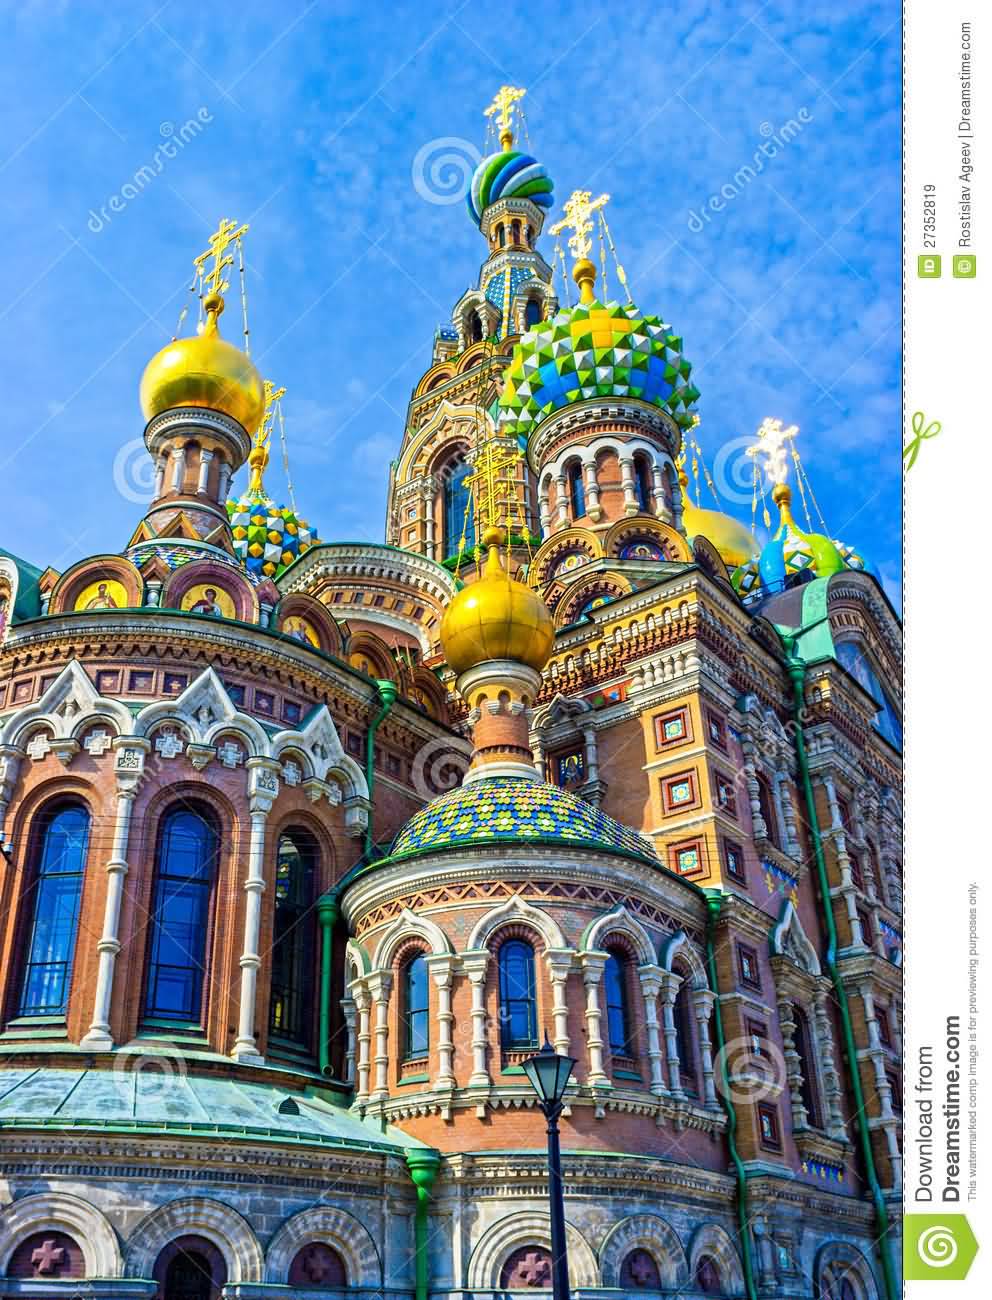 Colorful Exterior View Of The Church Of The Savior On Blood